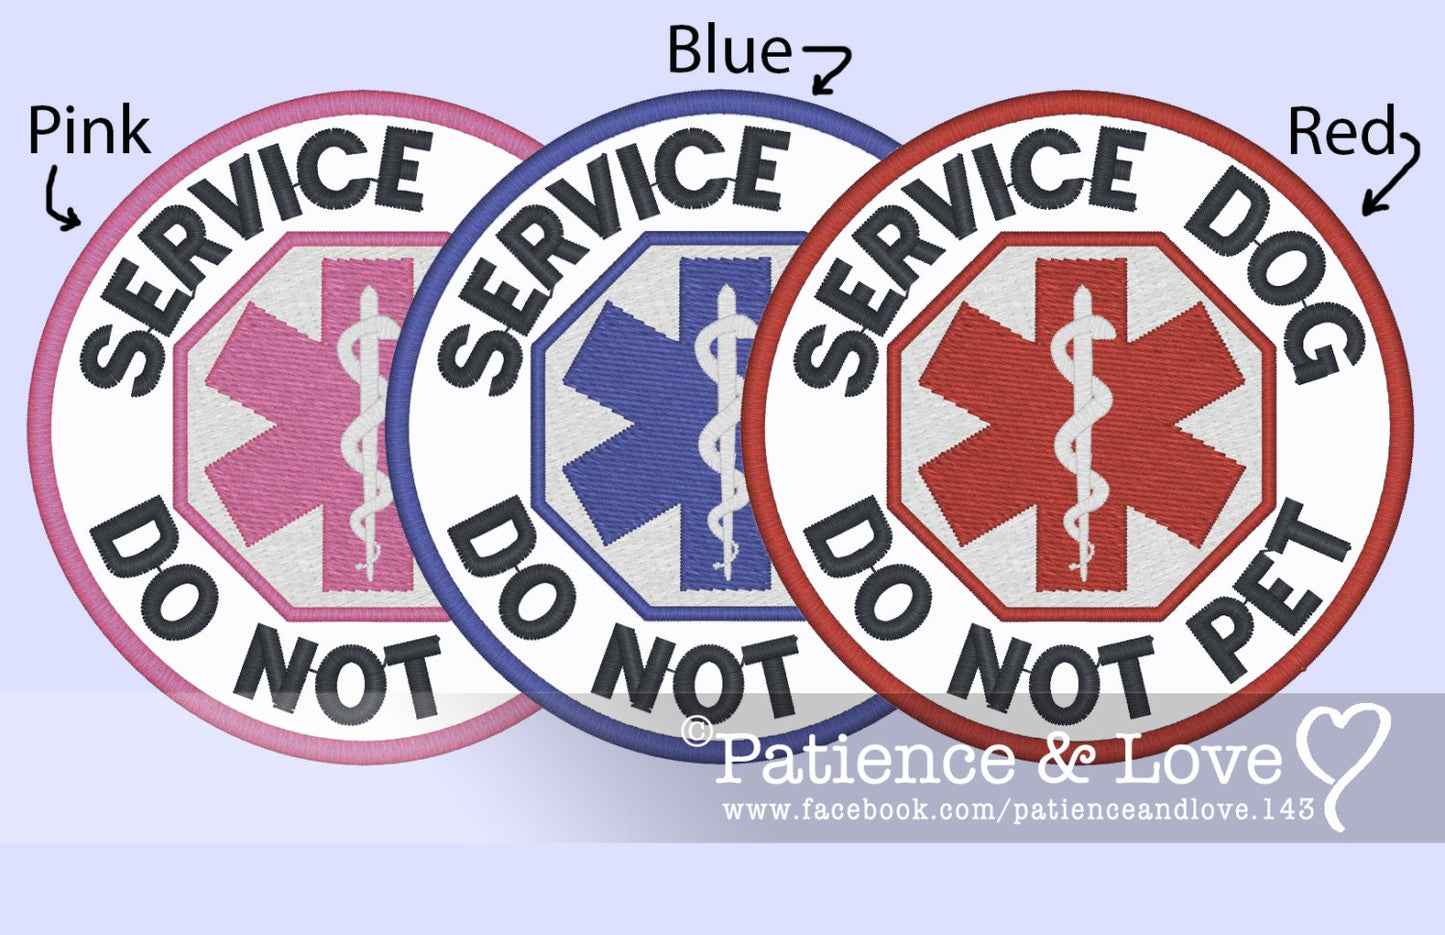 Service Dog, Do Not Pet, Medical symbol, 3 inch round patch